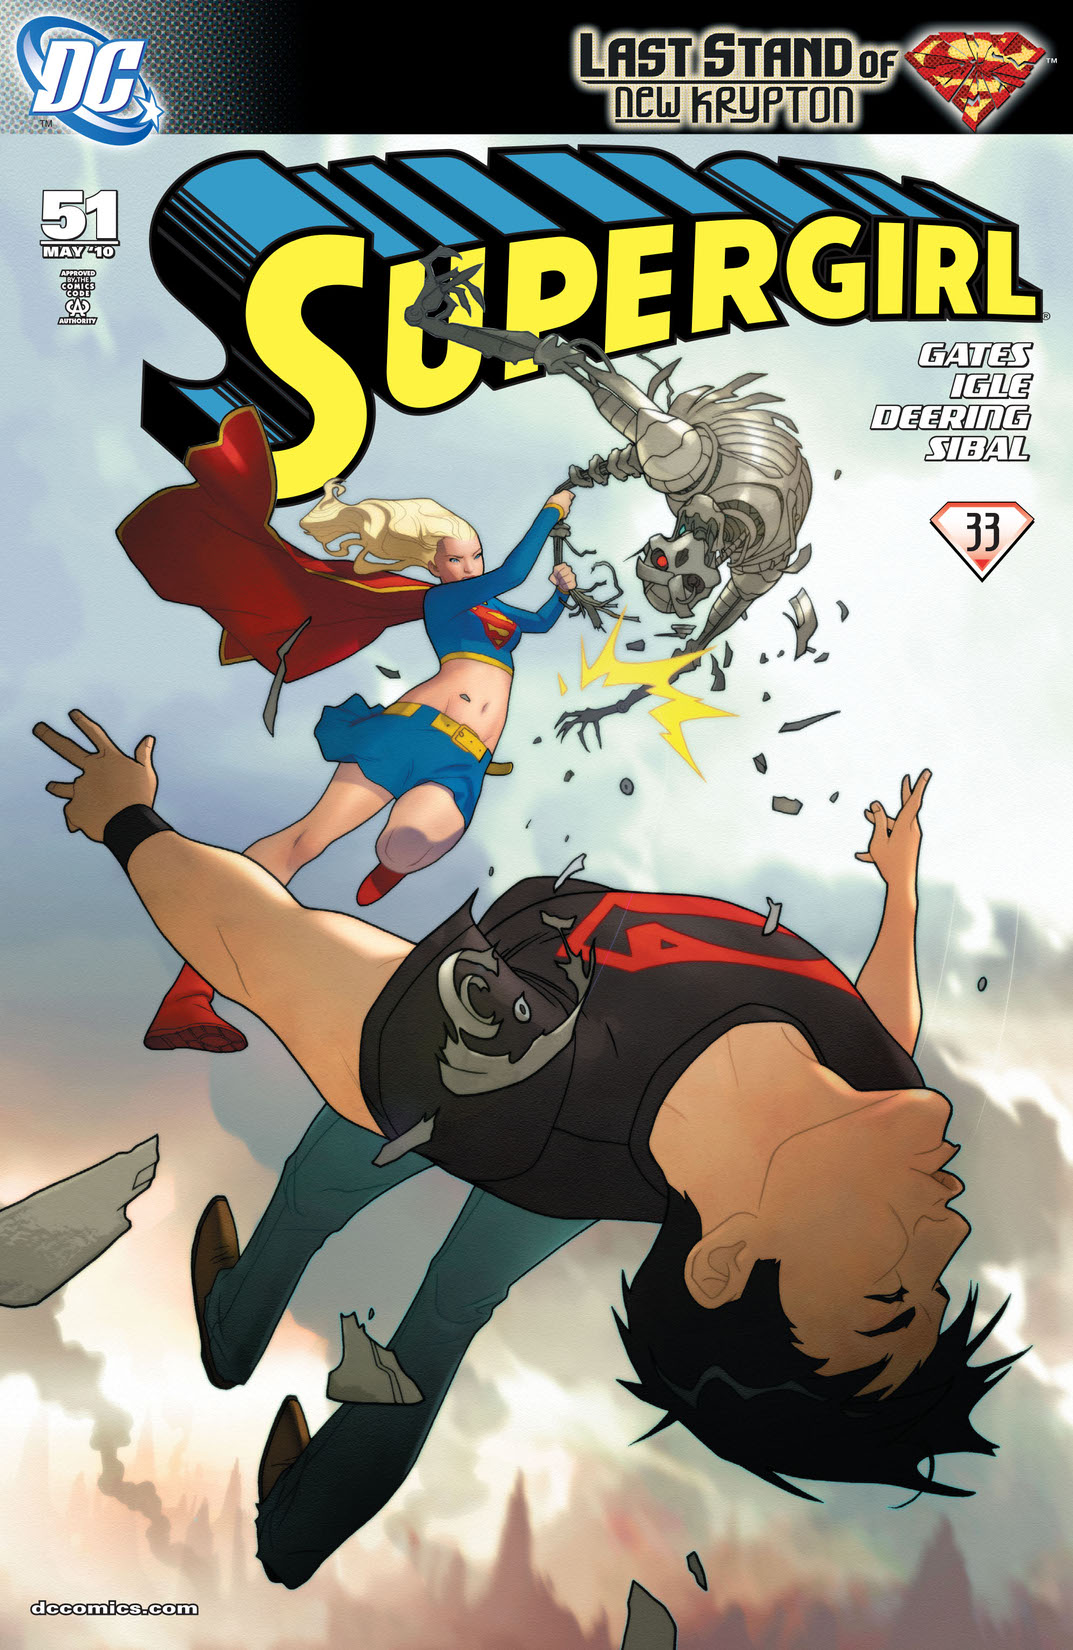 Supergirl (2005-) #51 preview images